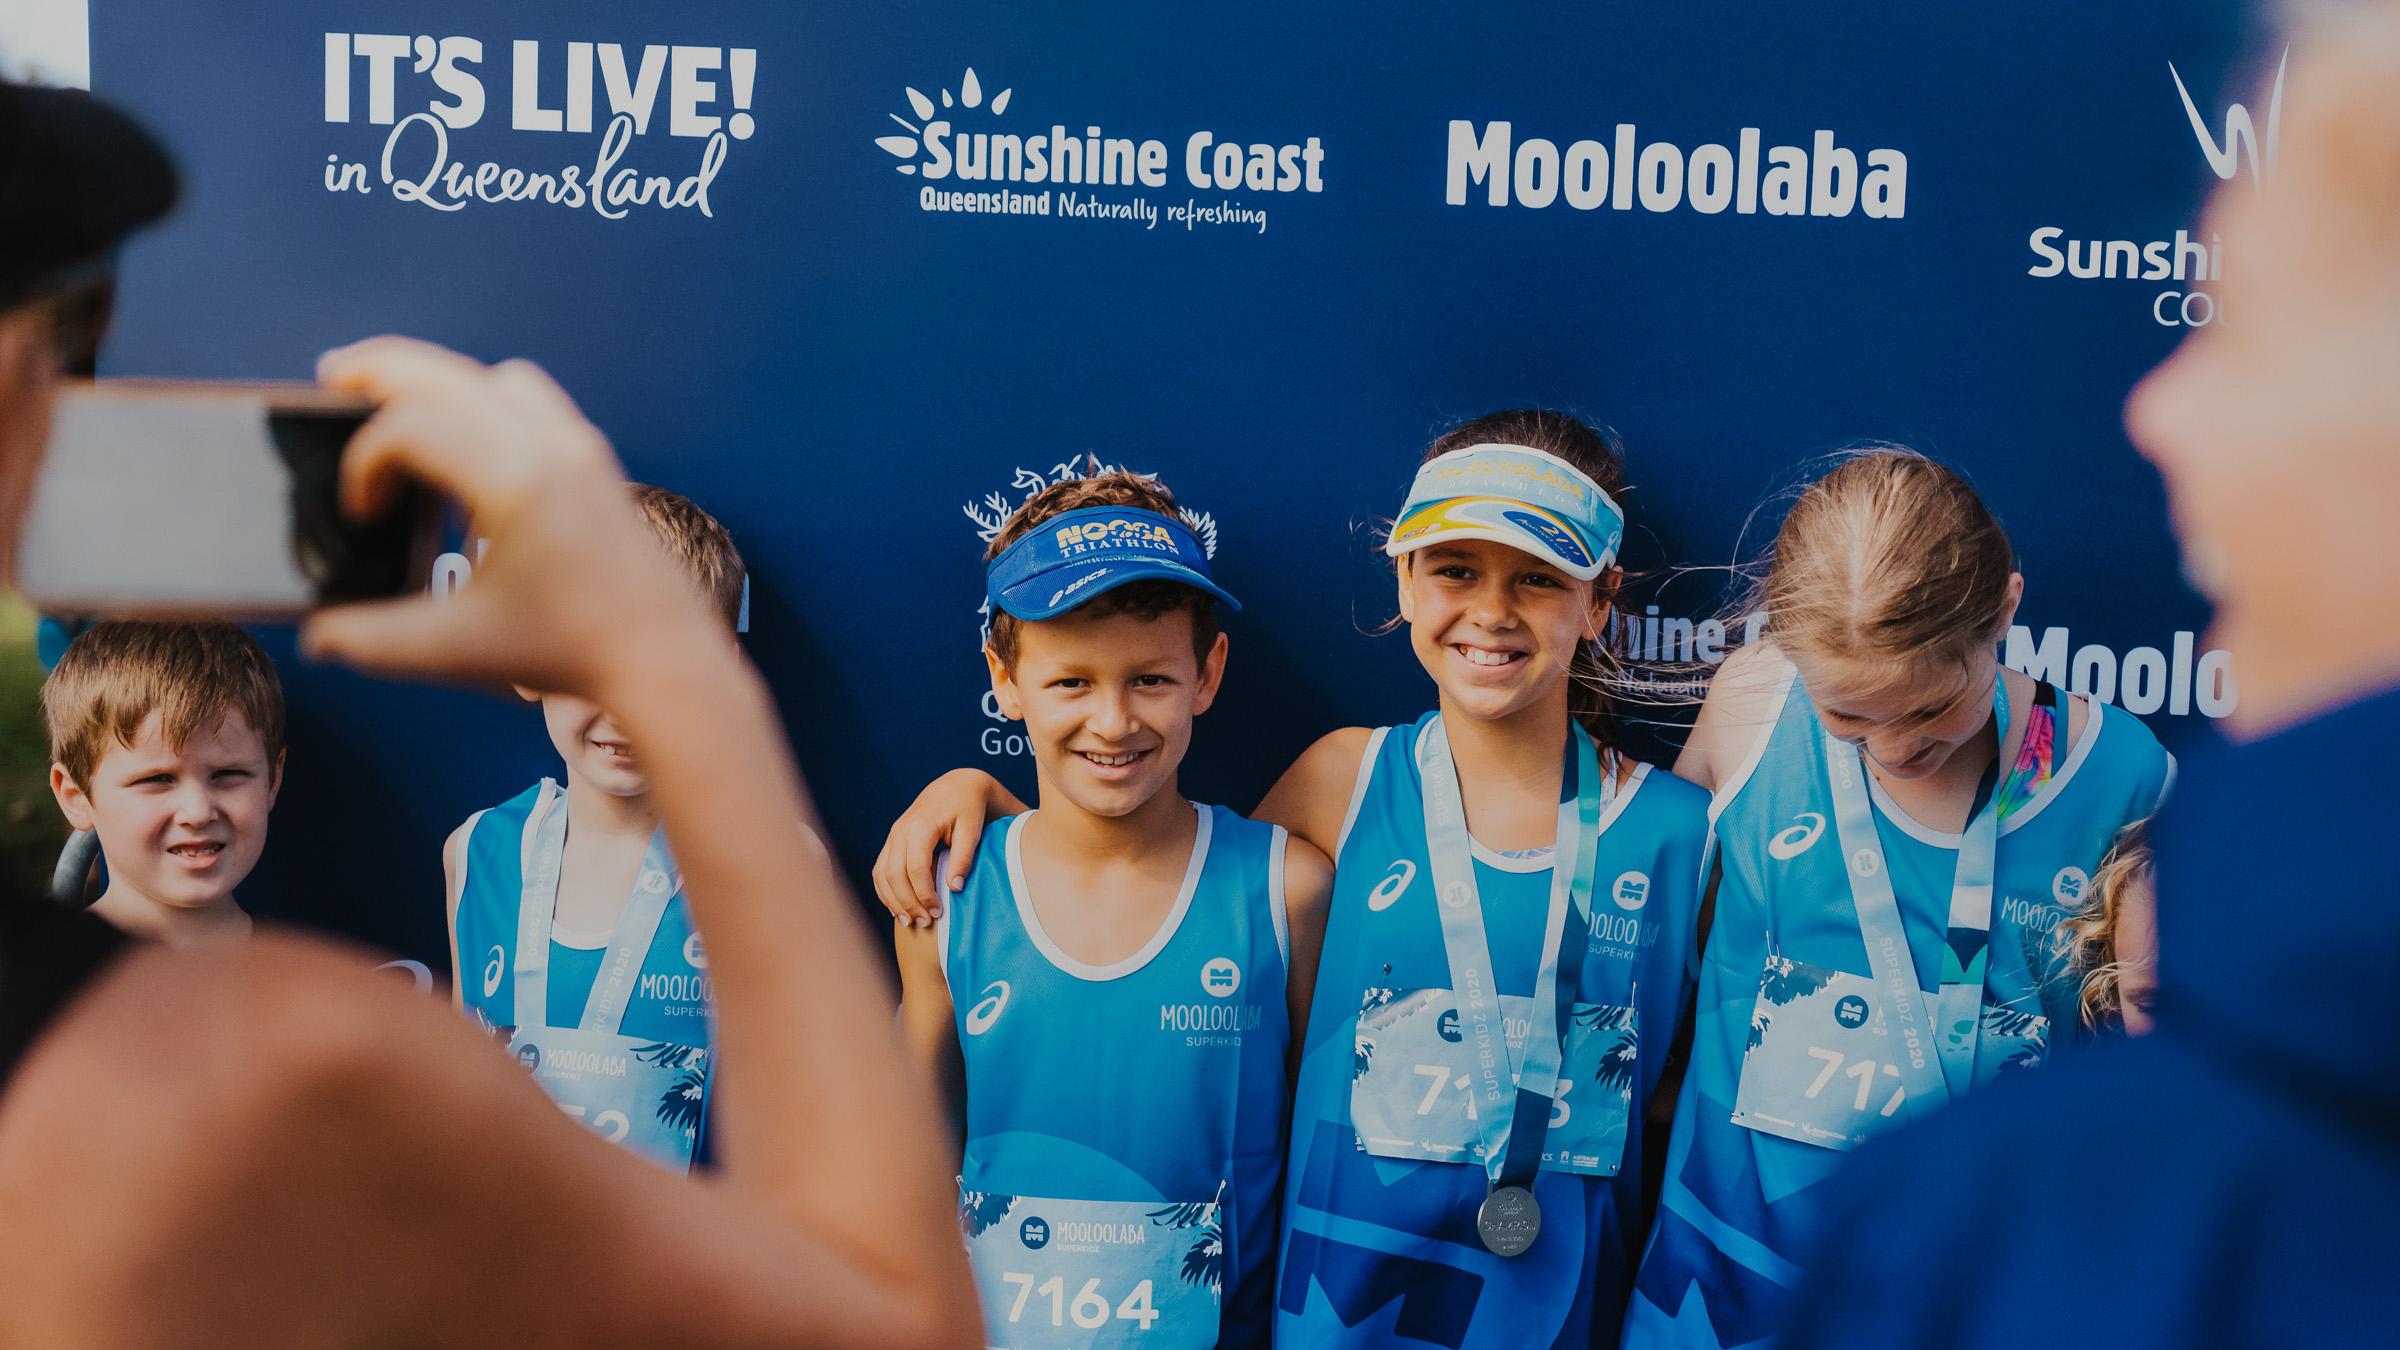 Parents taking pictures of young athletes who received medals in the Mooloolaba Triathlon